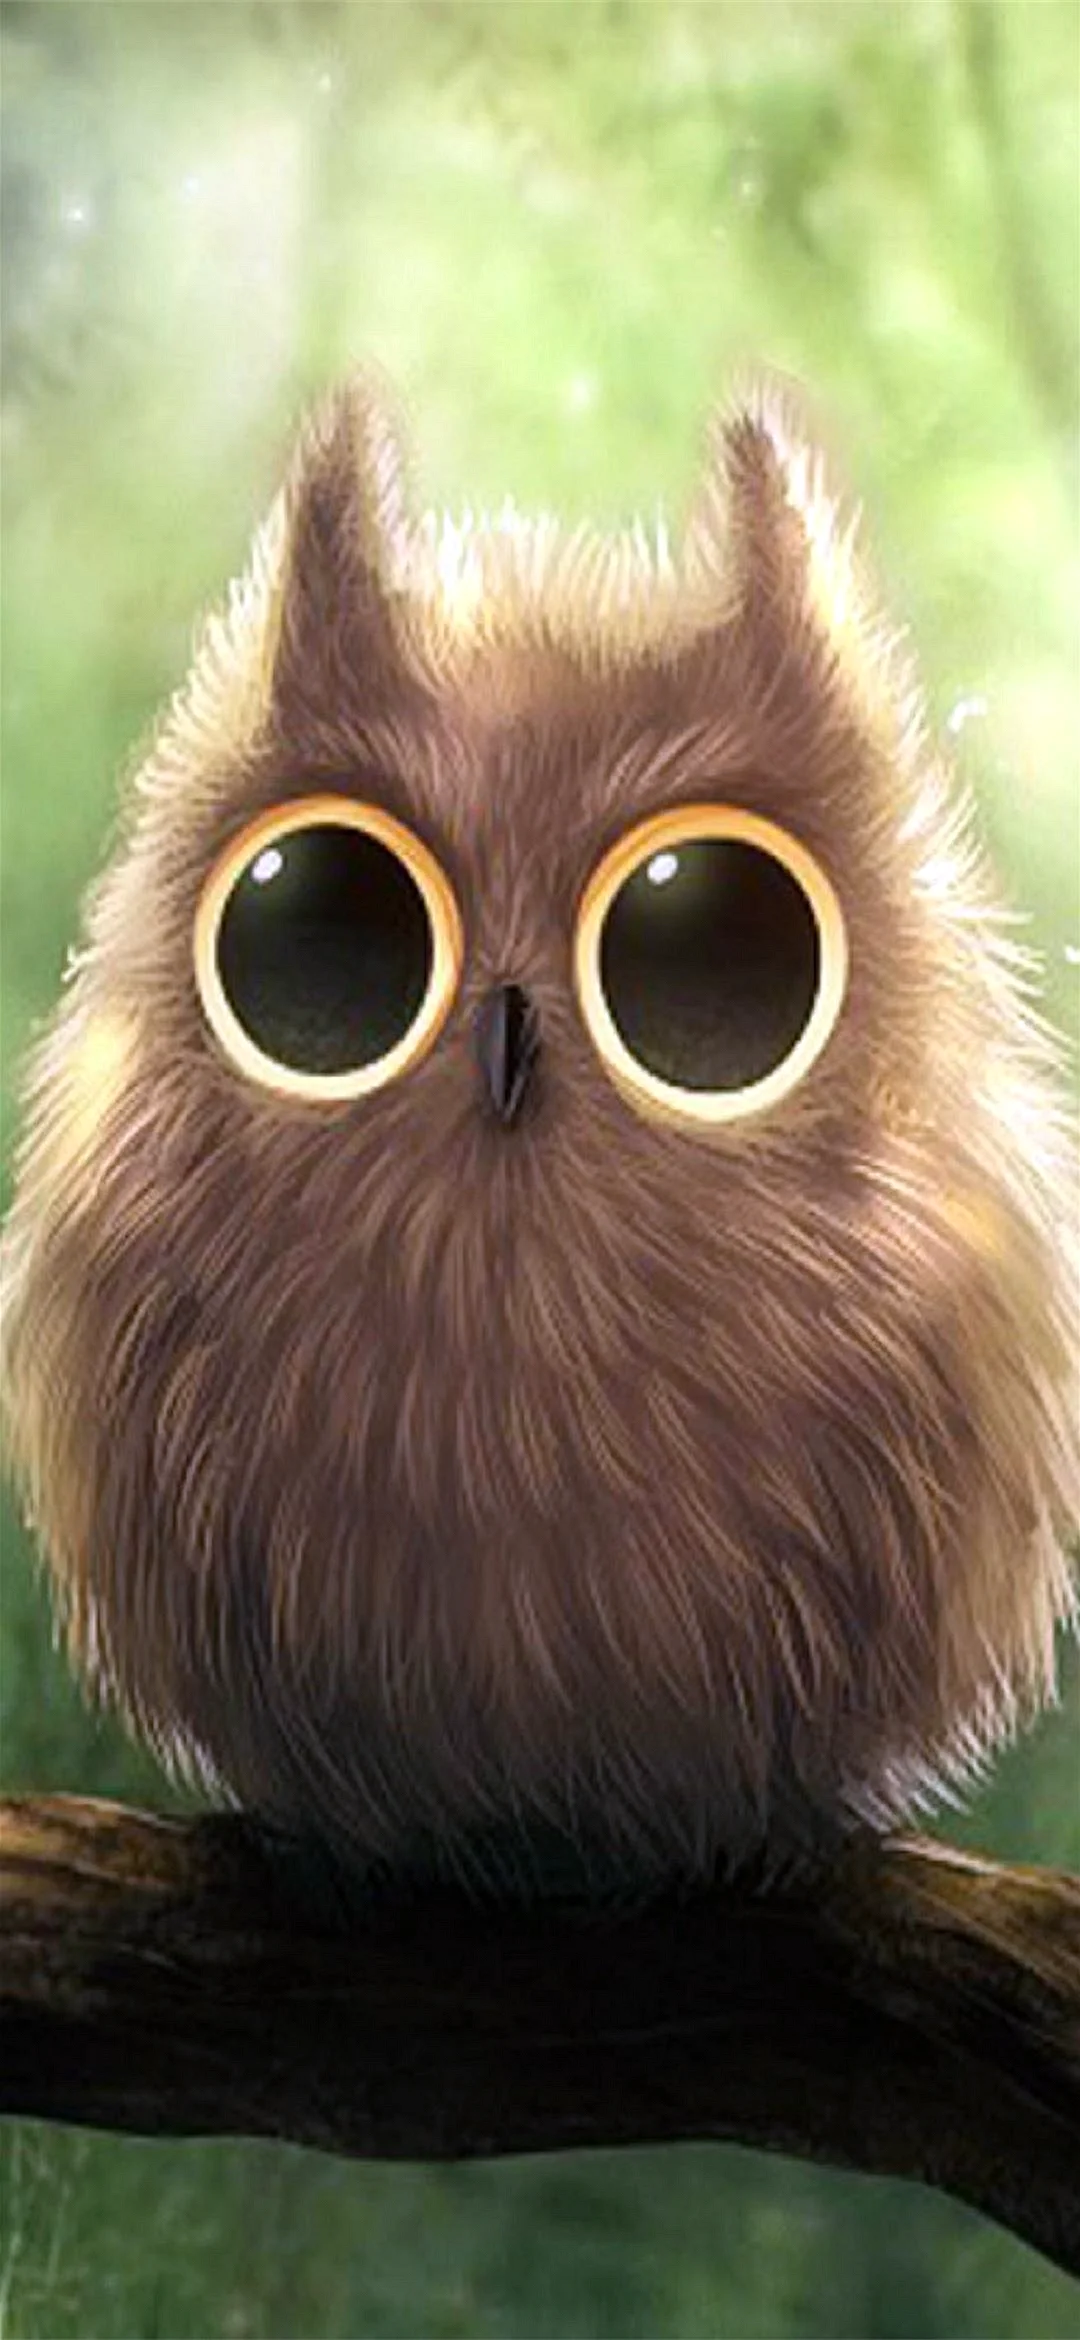 Owl Cave Wallpaper for iPhone 12 mini